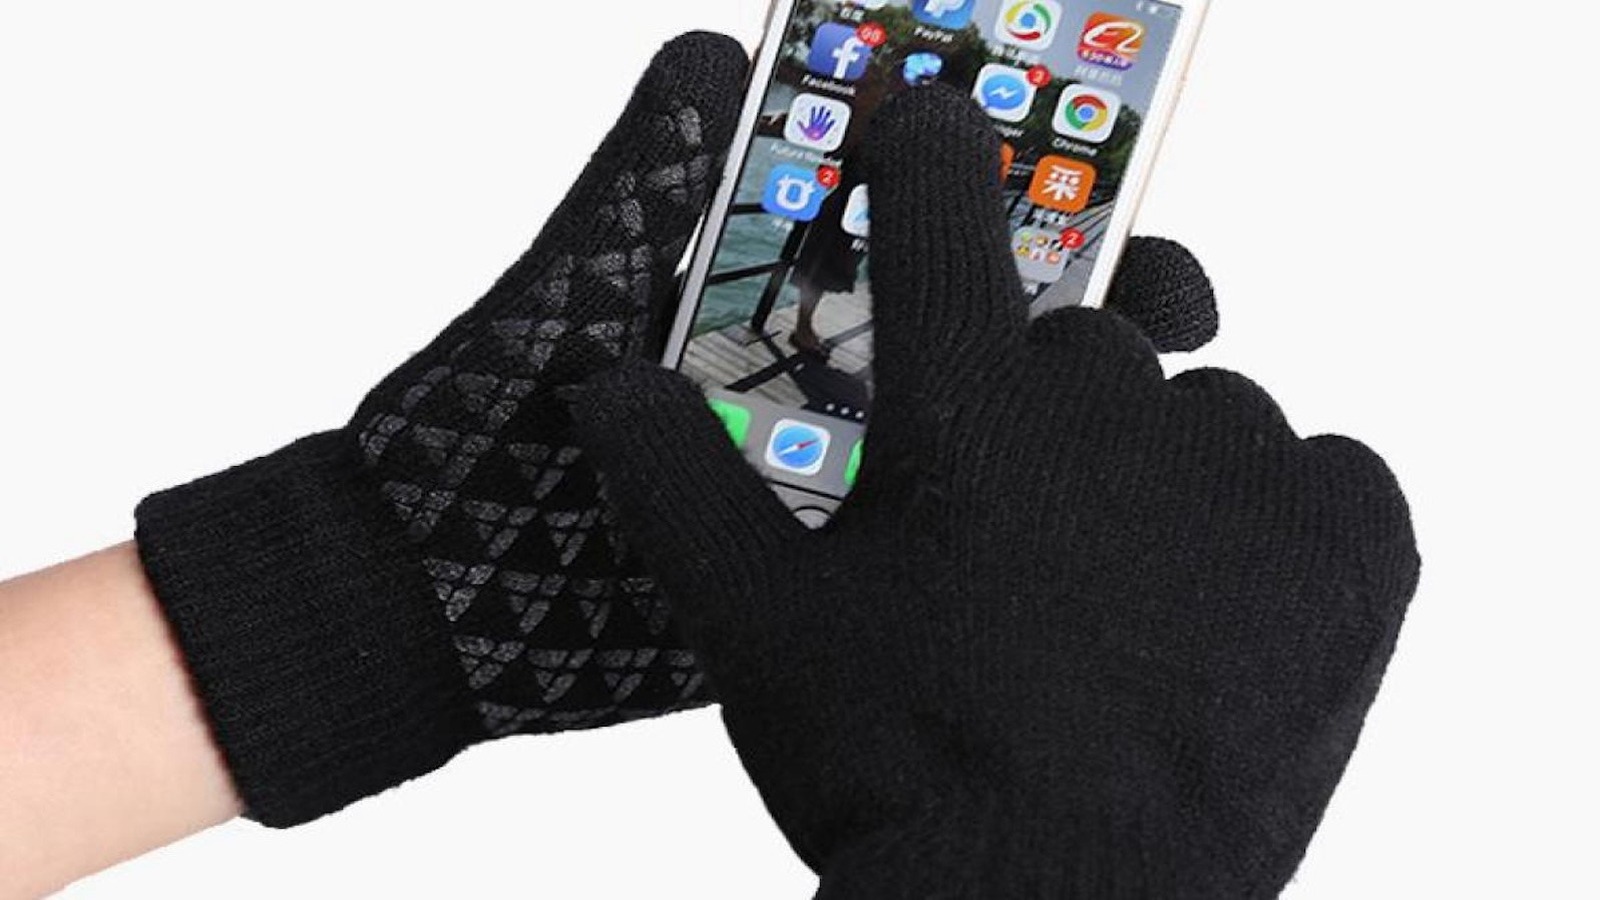 This Smartphone Glove Deal Is A Great Stocking Stuffer You'll Want To ...